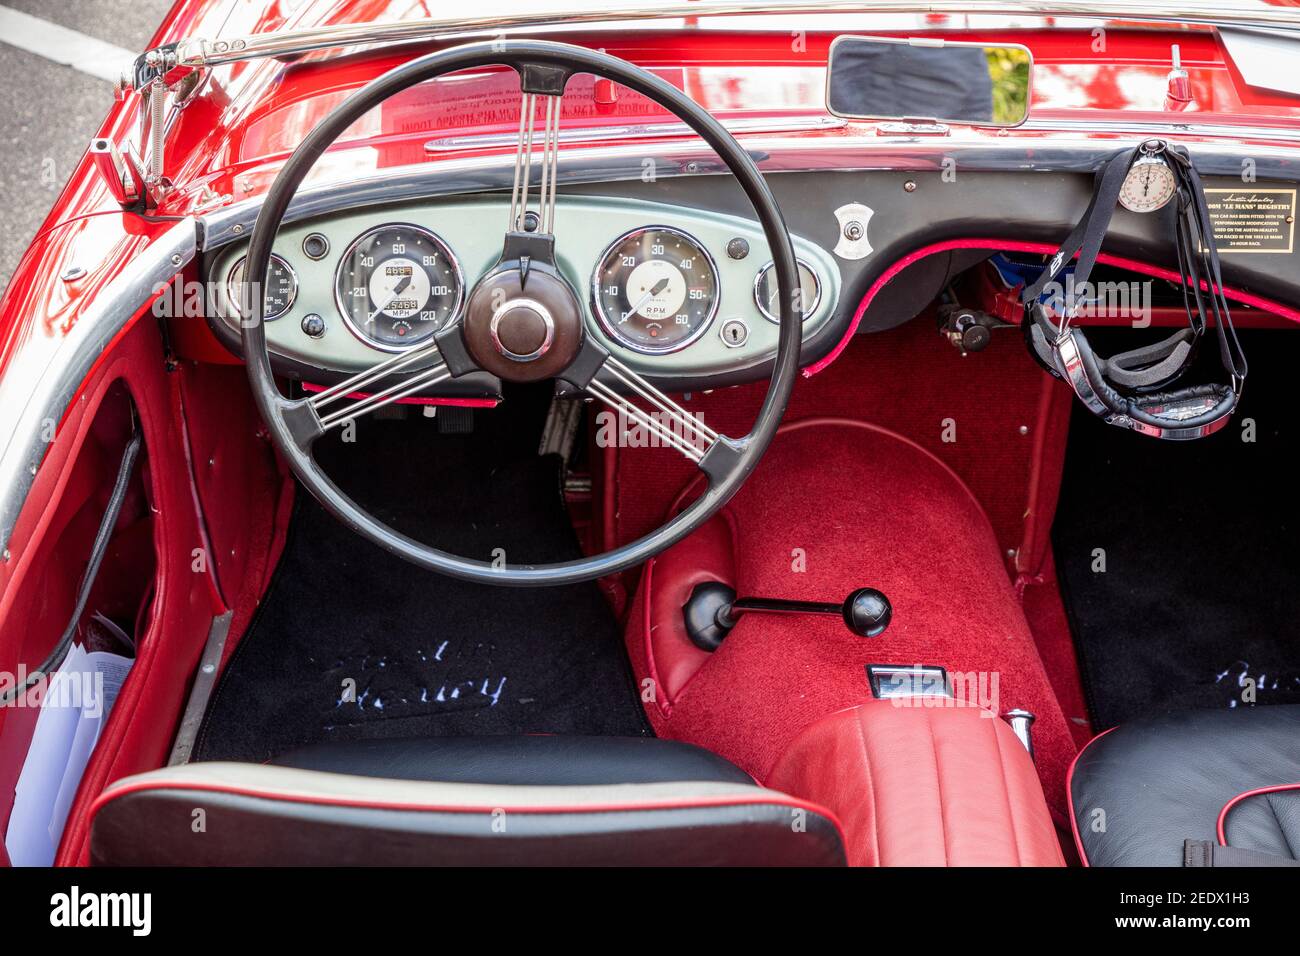 1954 Austin Healey 100 Le Mans on display at 'Cars on Fifth' - Naples, Florida, USA Stock Photo